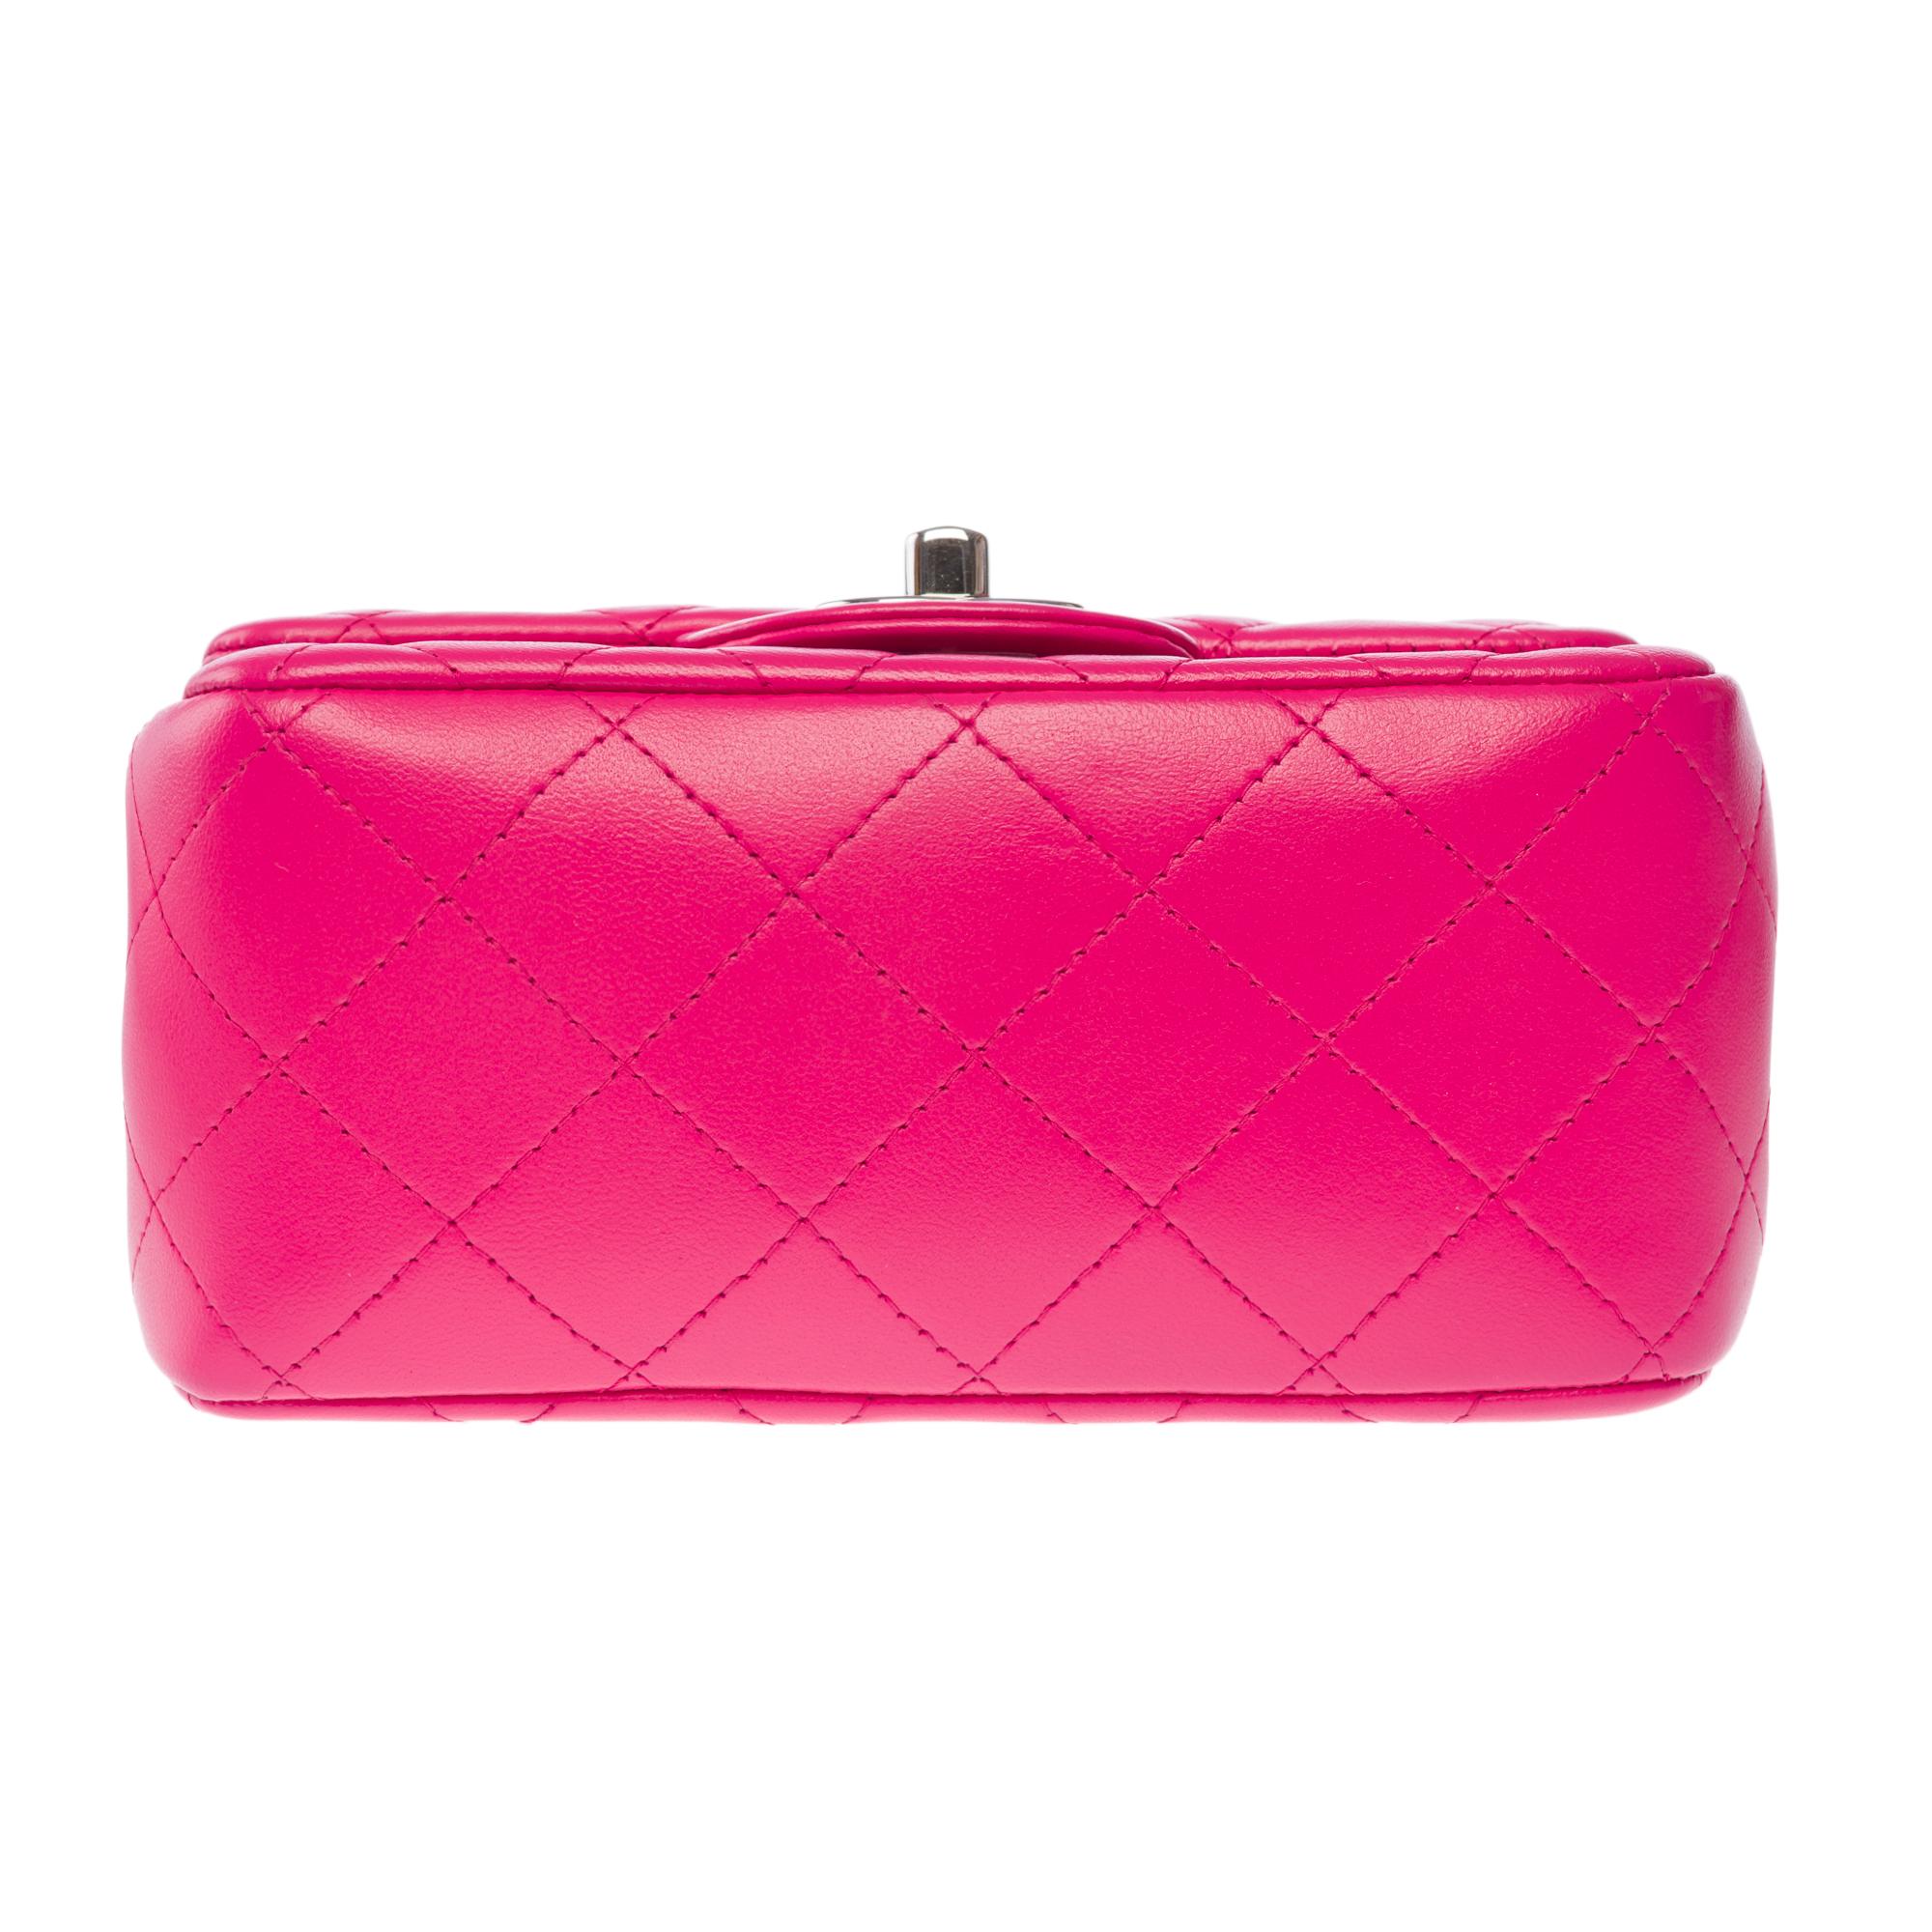 Gorgeous Chanel Mini Timeless Shoulder flap bag in Pink quilted leather, SHW 6